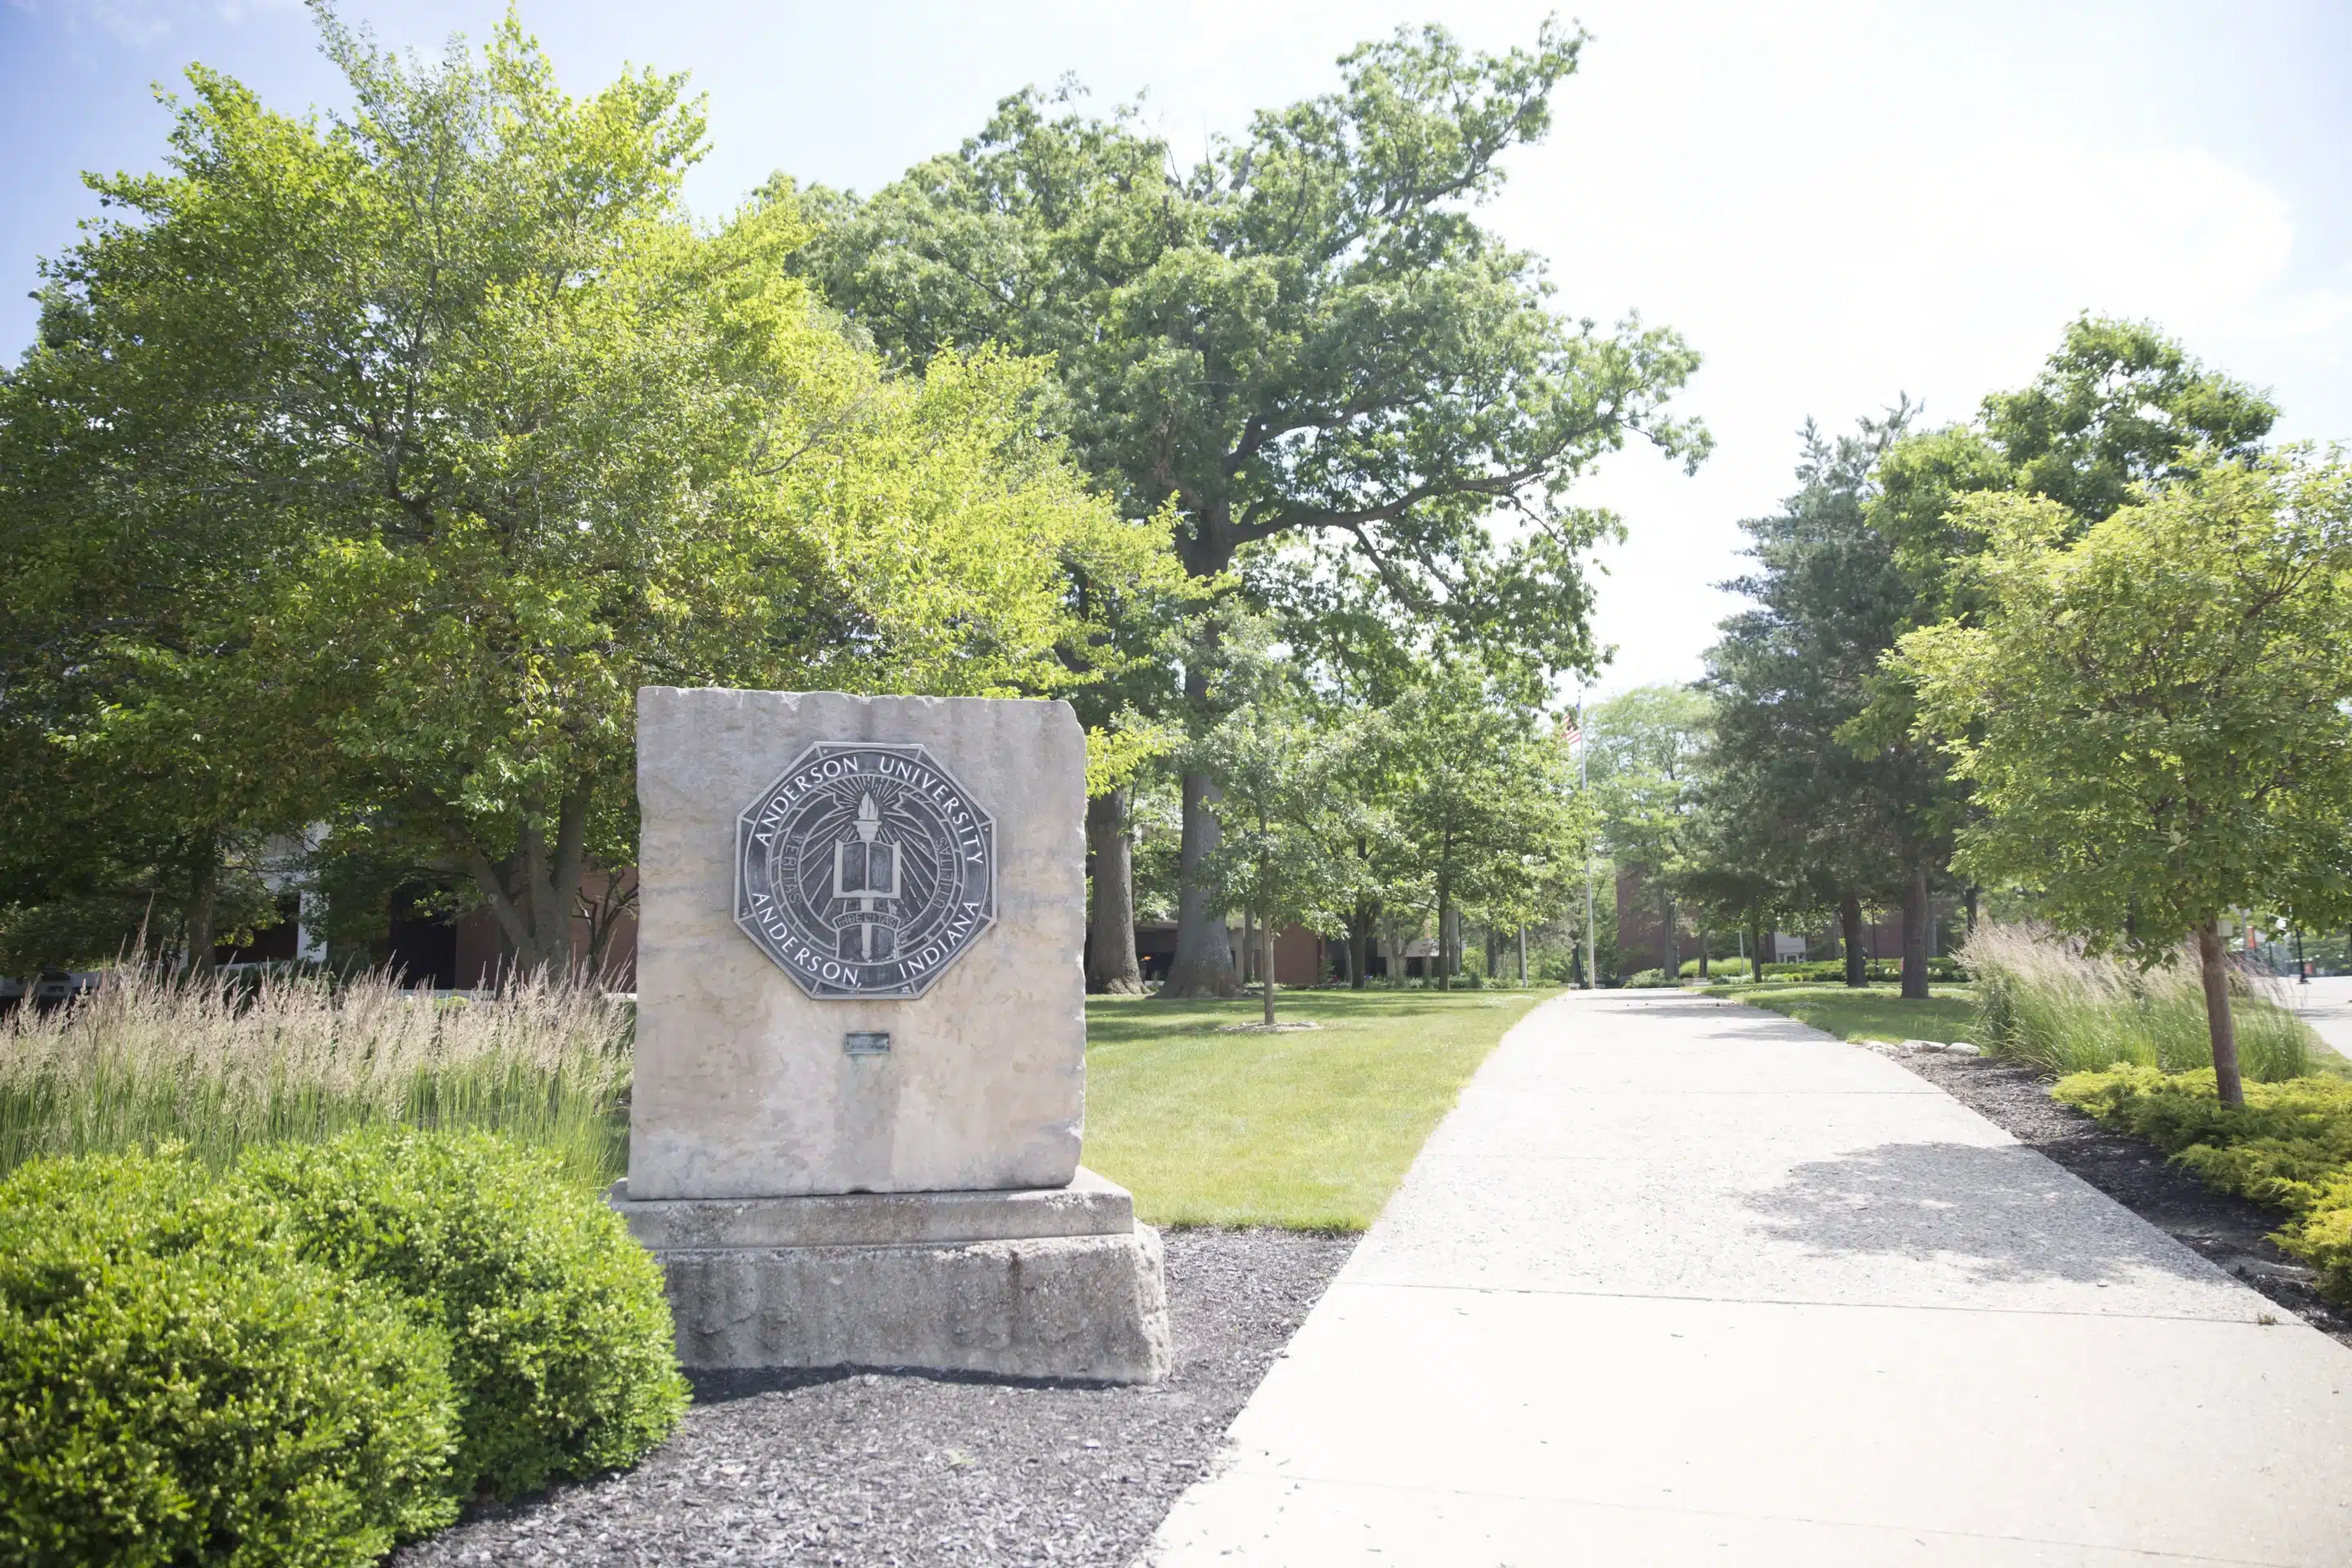 Anderson University stone sign at entrance to campus